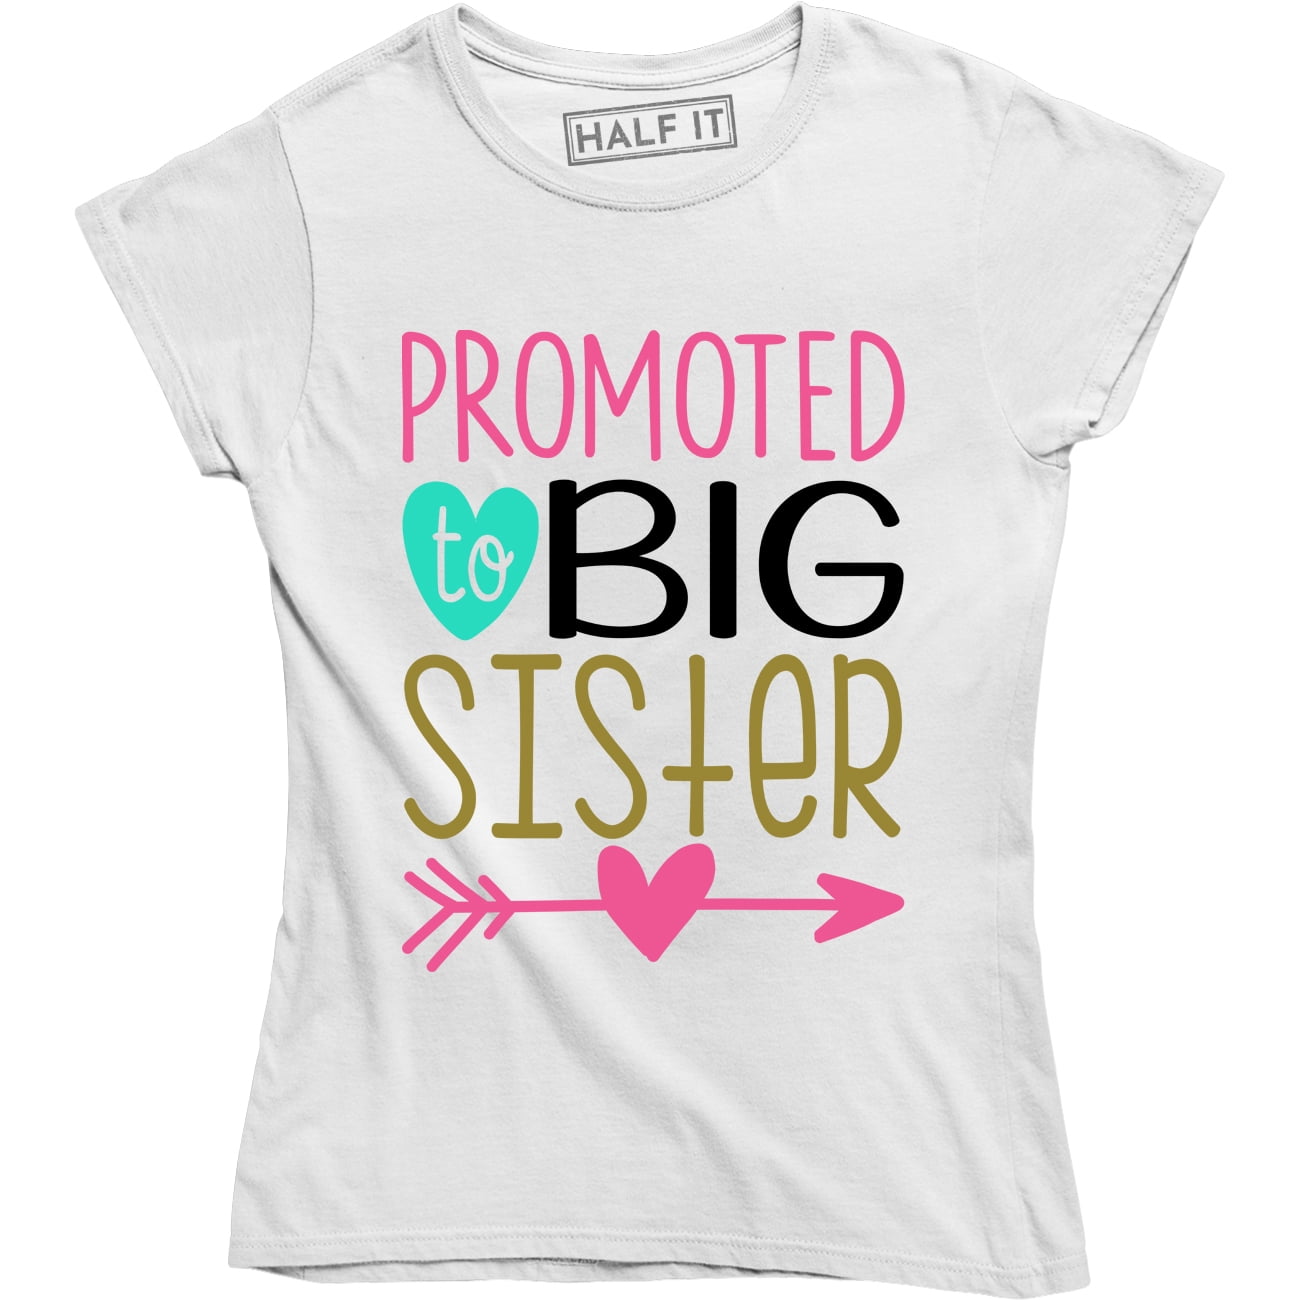 Toddler Girl T-Shirt B Is For Big Sister Tee Big Sis T-Shirt Pregnancy Announcement Shirt Big Sister Shirt Promoted To Big Sister Tee